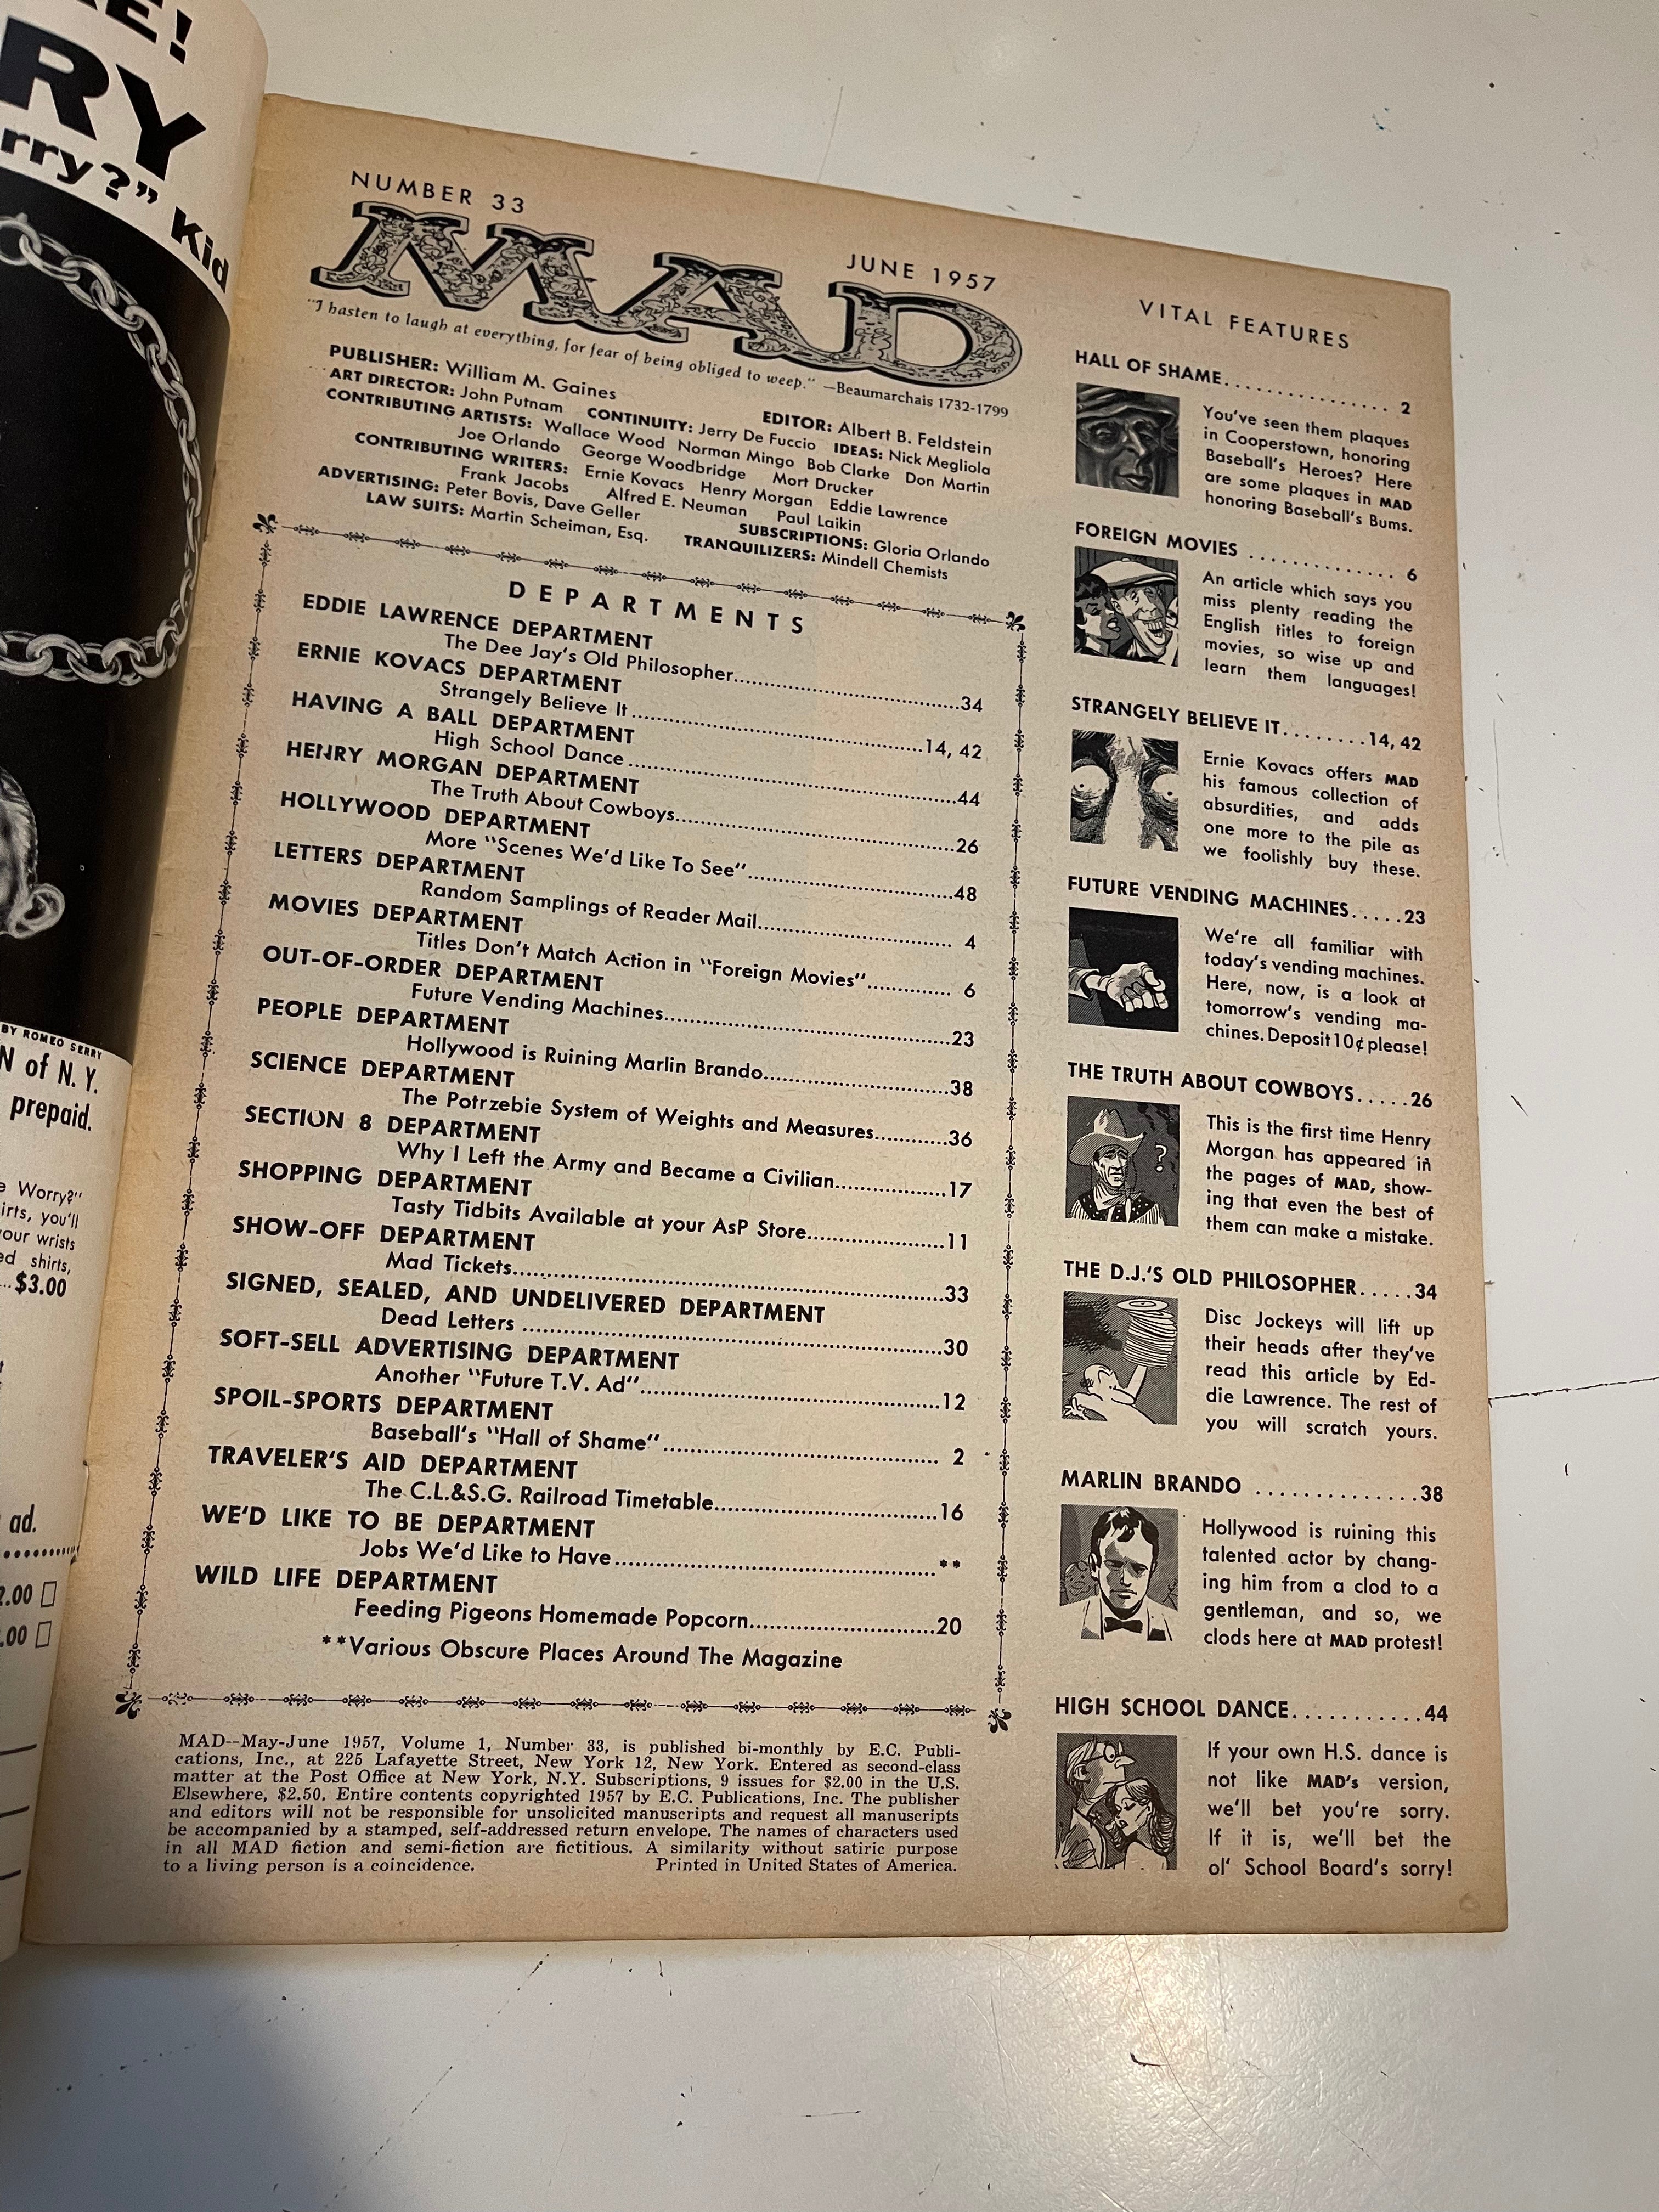 Mad Magazine #33 rare vintage early issue 1957